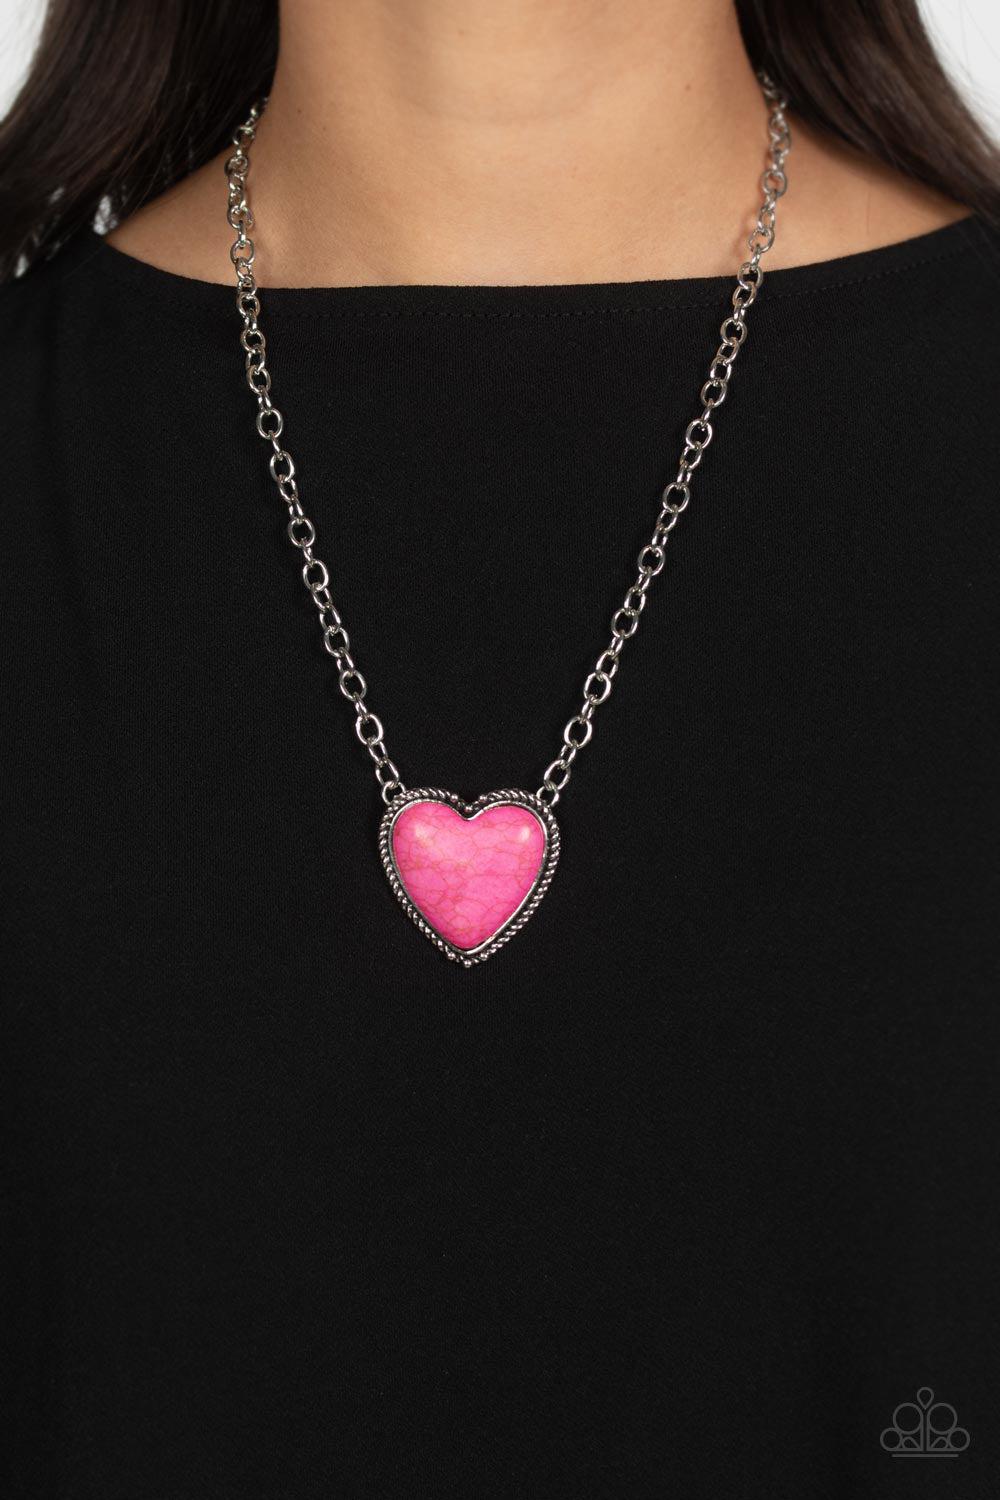 Authentic Admirer Pink Stone Heart Necklace - Paparazzi Accessories-on model - CarasShop.com - $5 Jewelry by Cara Jewels